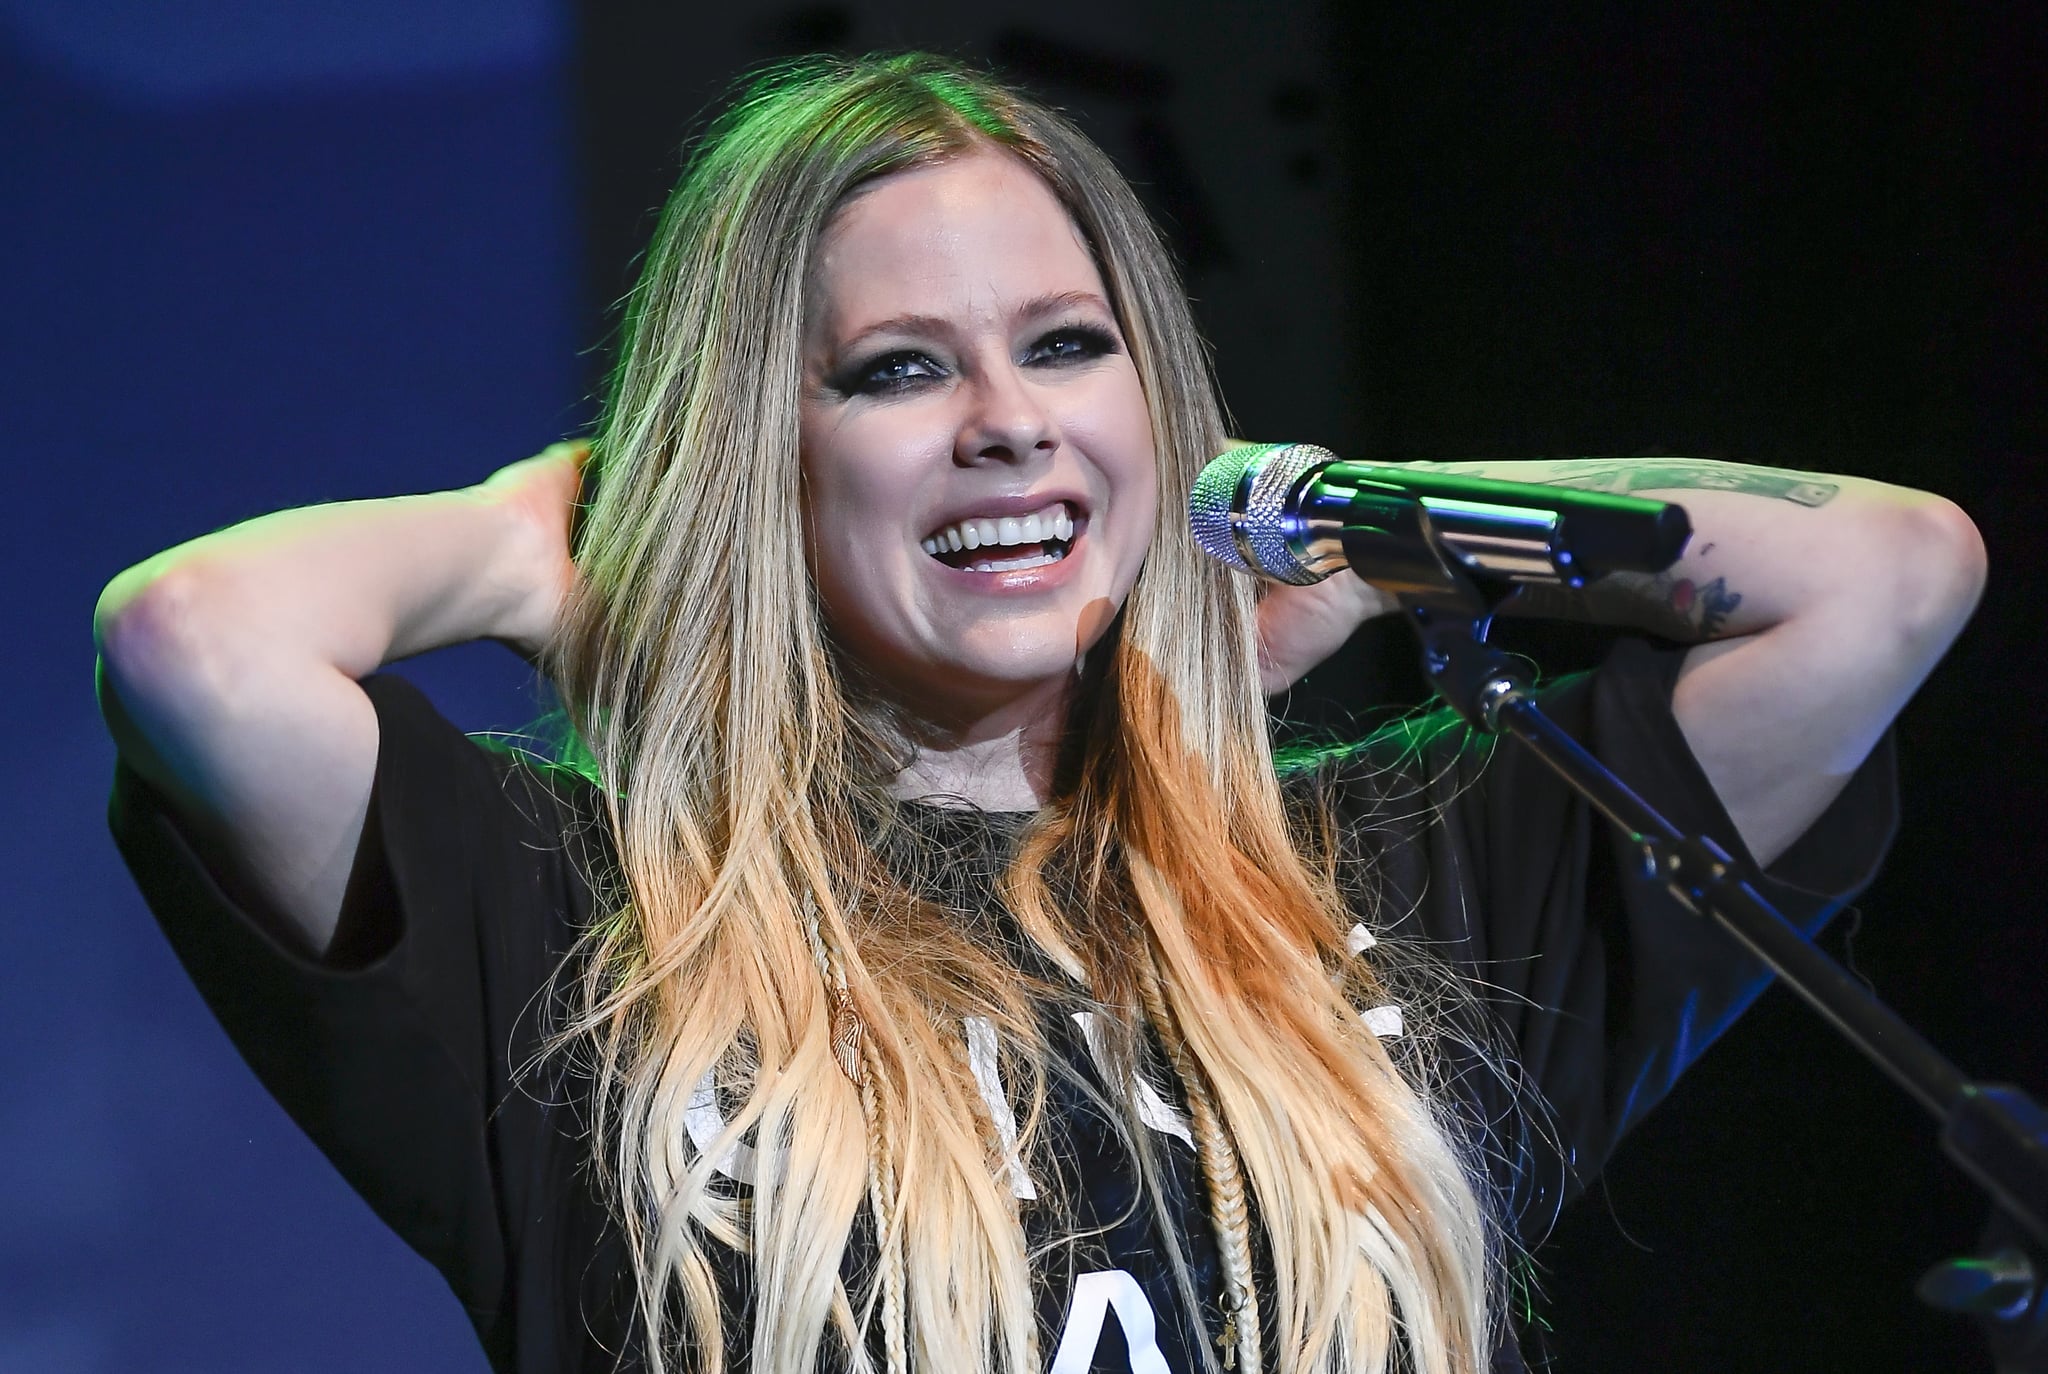 NAPA, CA - NOVEMBER 01:  Singer Avril Lavigne performs on Day 2 of Live In The Vineyard at the Uptown Theatre Napa on November 1, 2019 in Napa, California.  (Photo by Steve Jennings/WireImage)